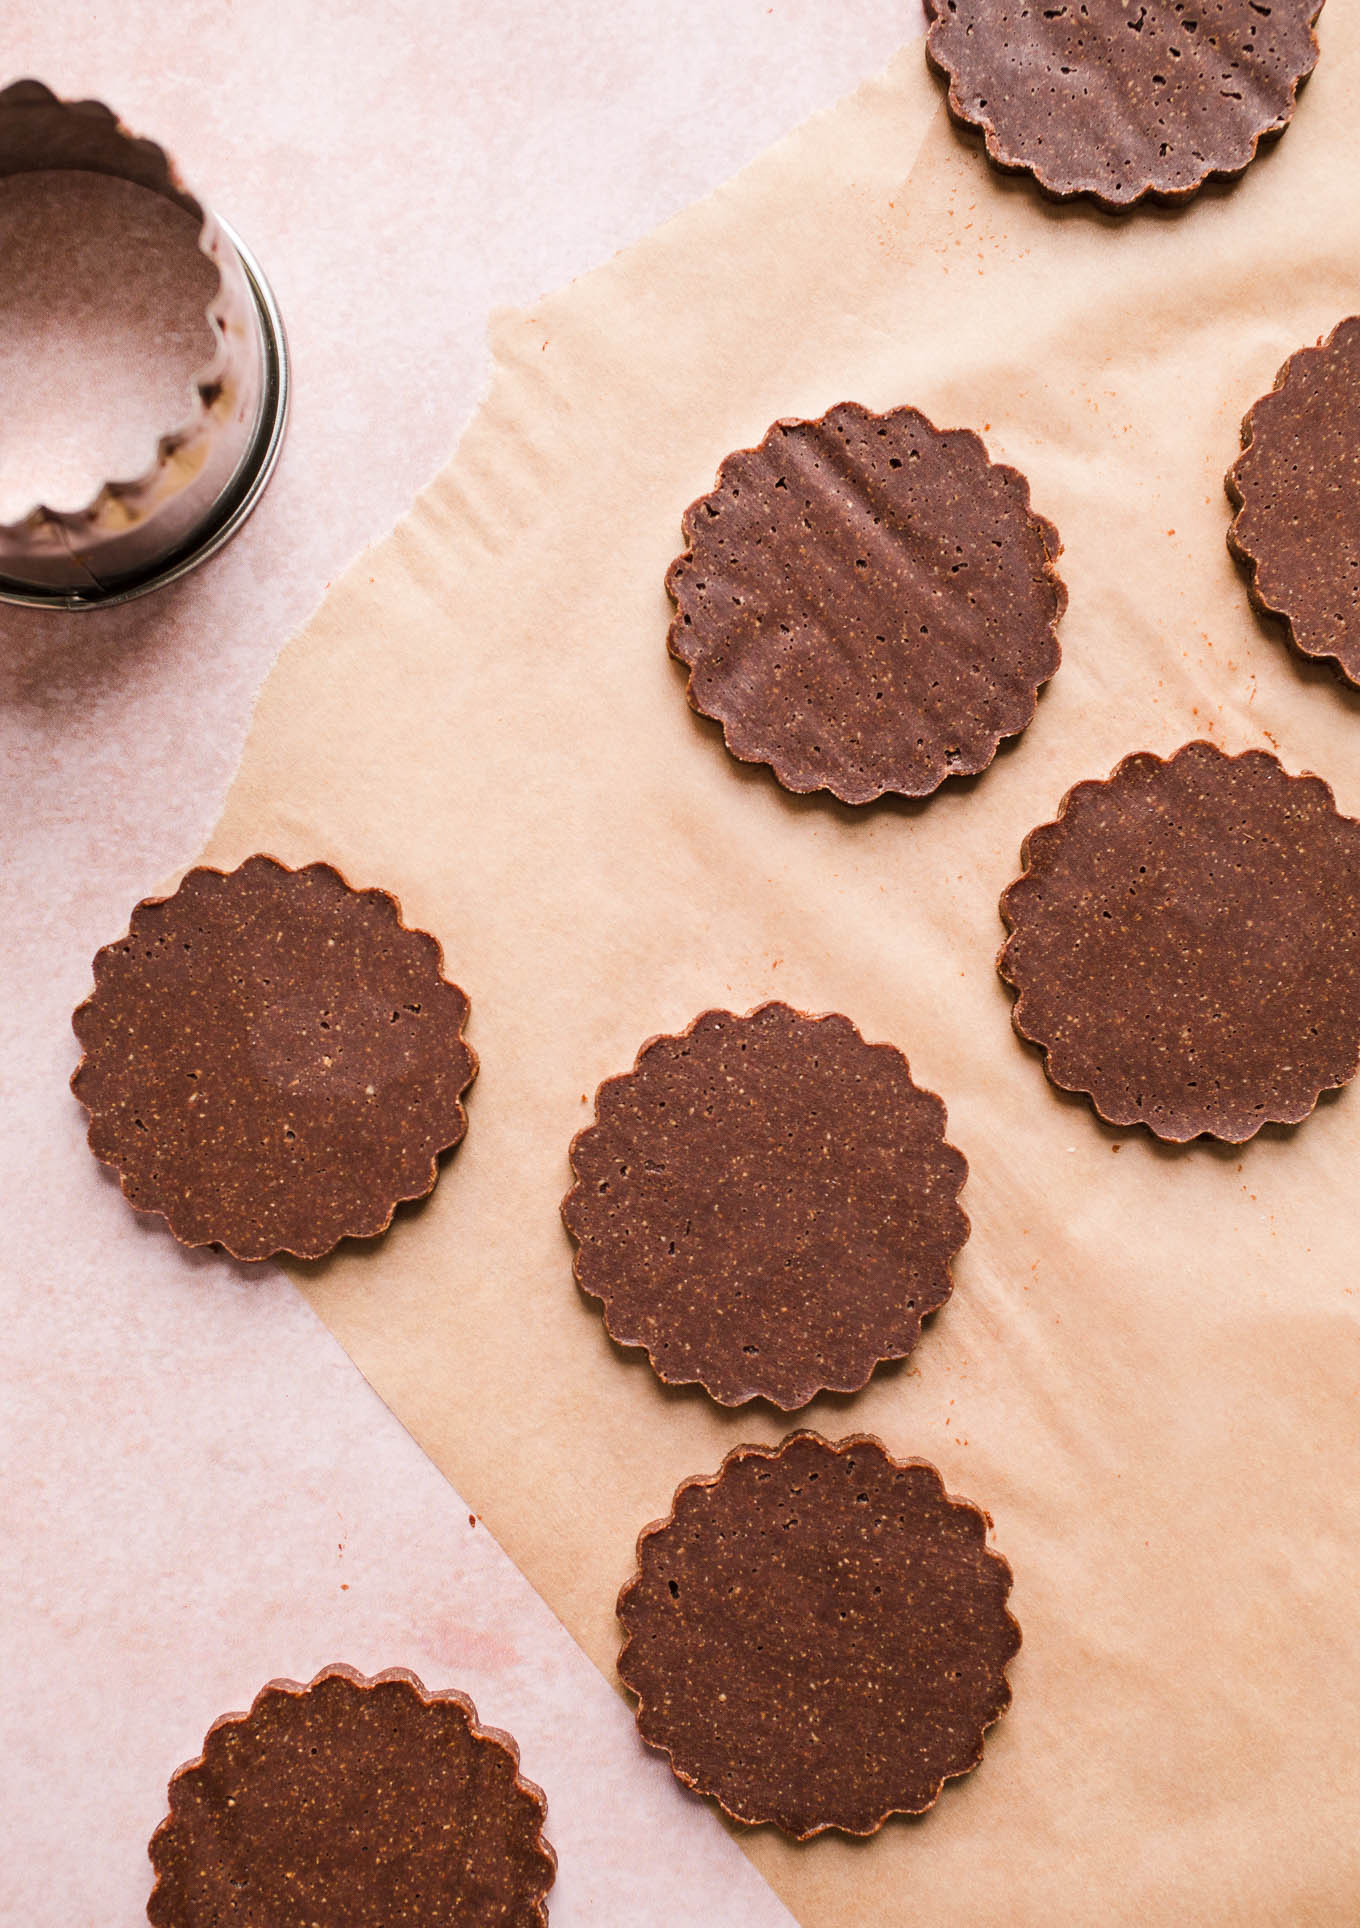 No Bake Chocolate Maca Cookies made with almond flour, cacao powder, maple syrup, coconut oil, and superfood maca powder. Gluten-free, vegan, refined sugar-free. 